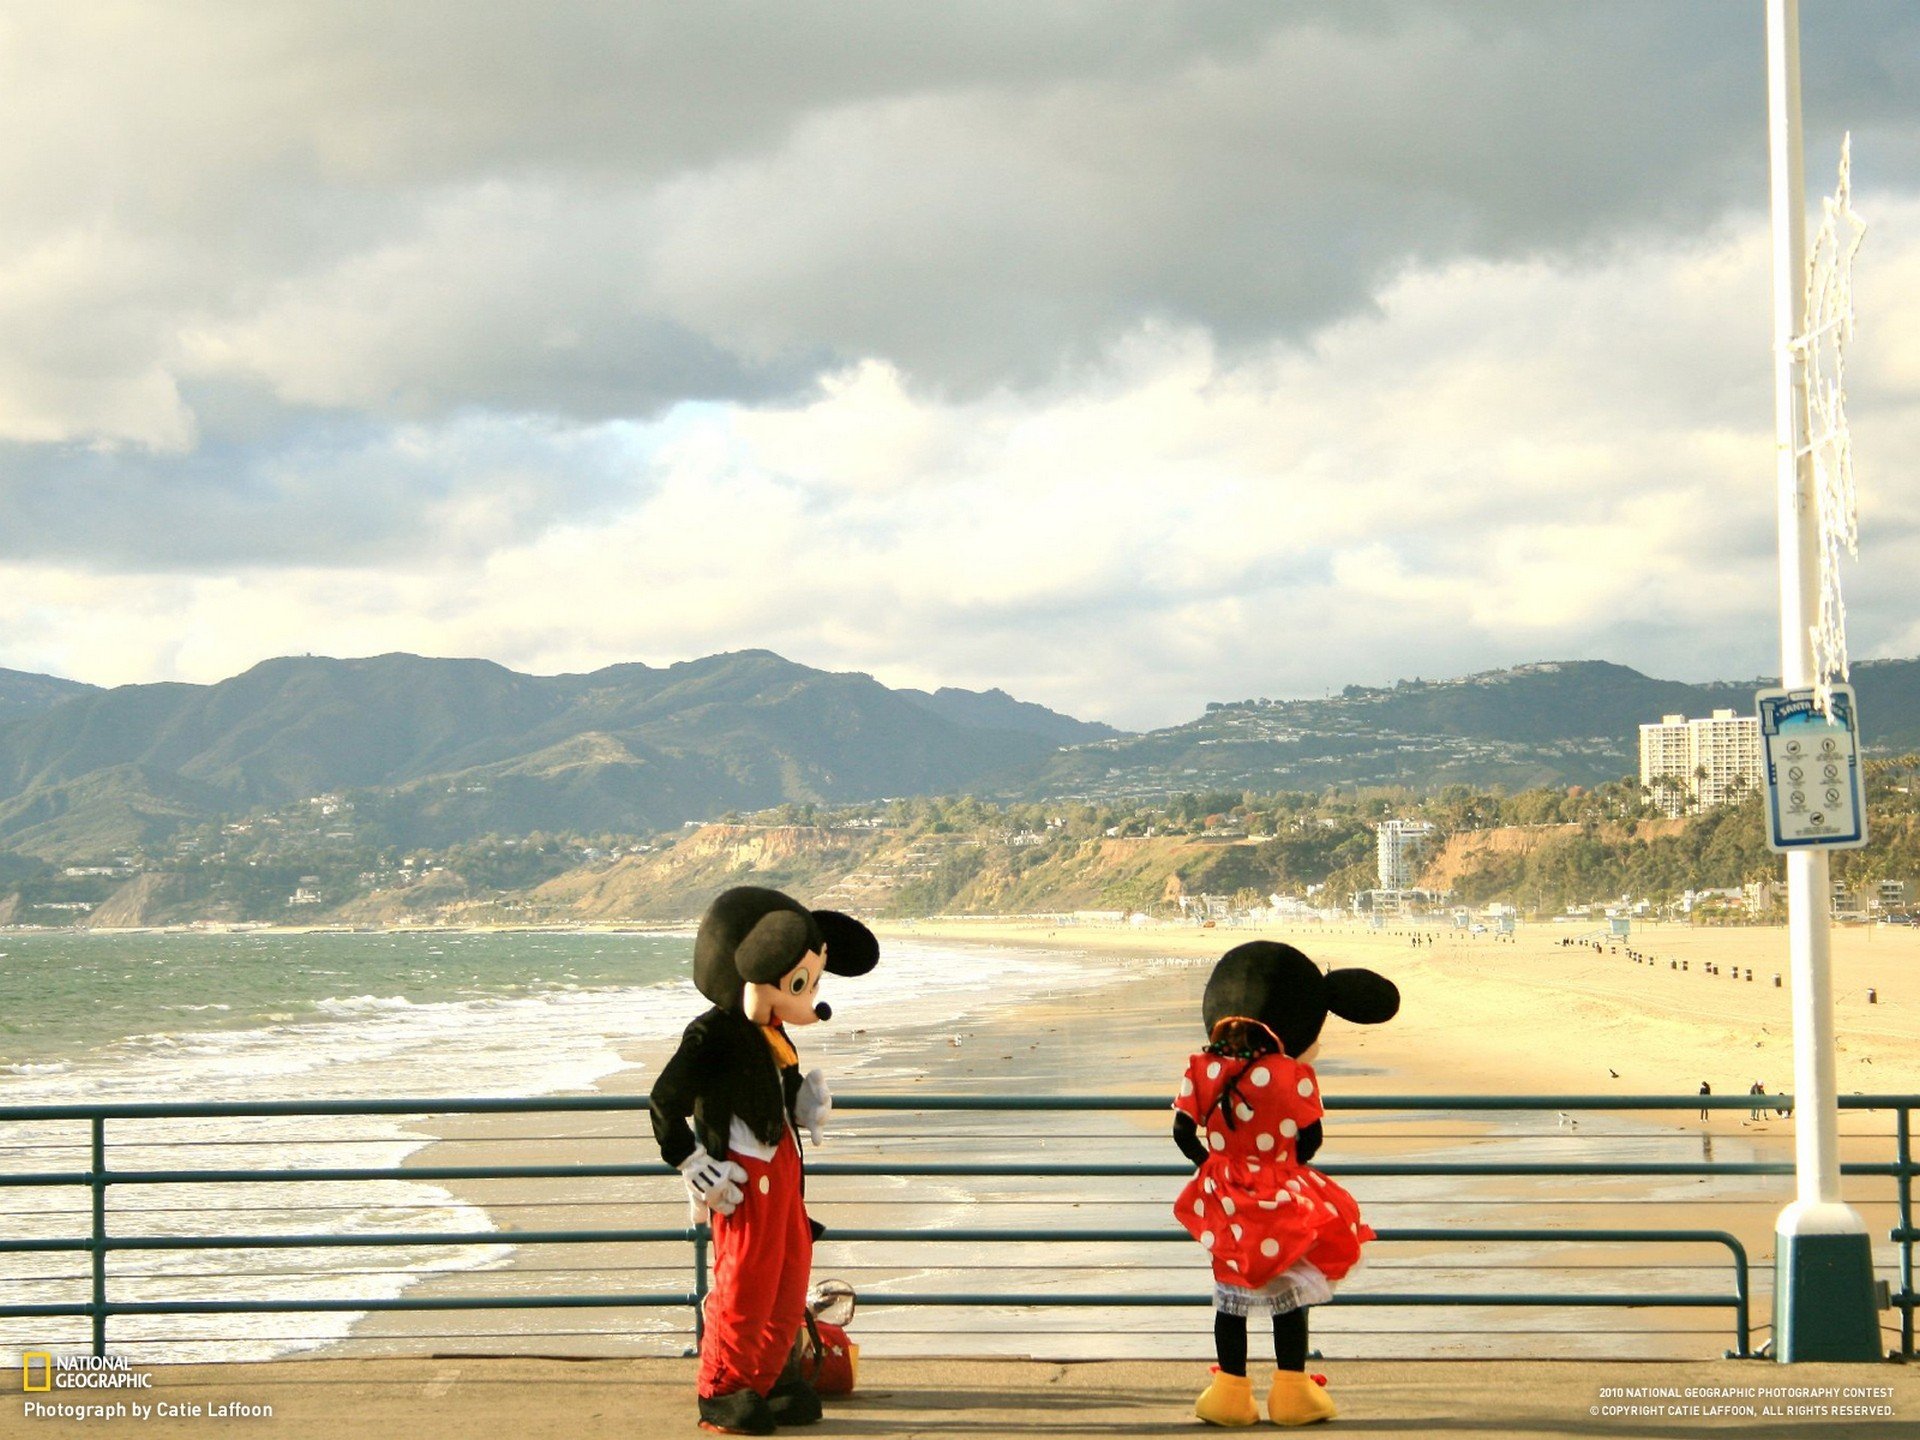 landscapes, Nature, Costume, Funny, Piers, California, National, Geographic, Mickey, Mouse, Santa, Monica, Beach, Railing, Minnie, Mouse Wallpaper